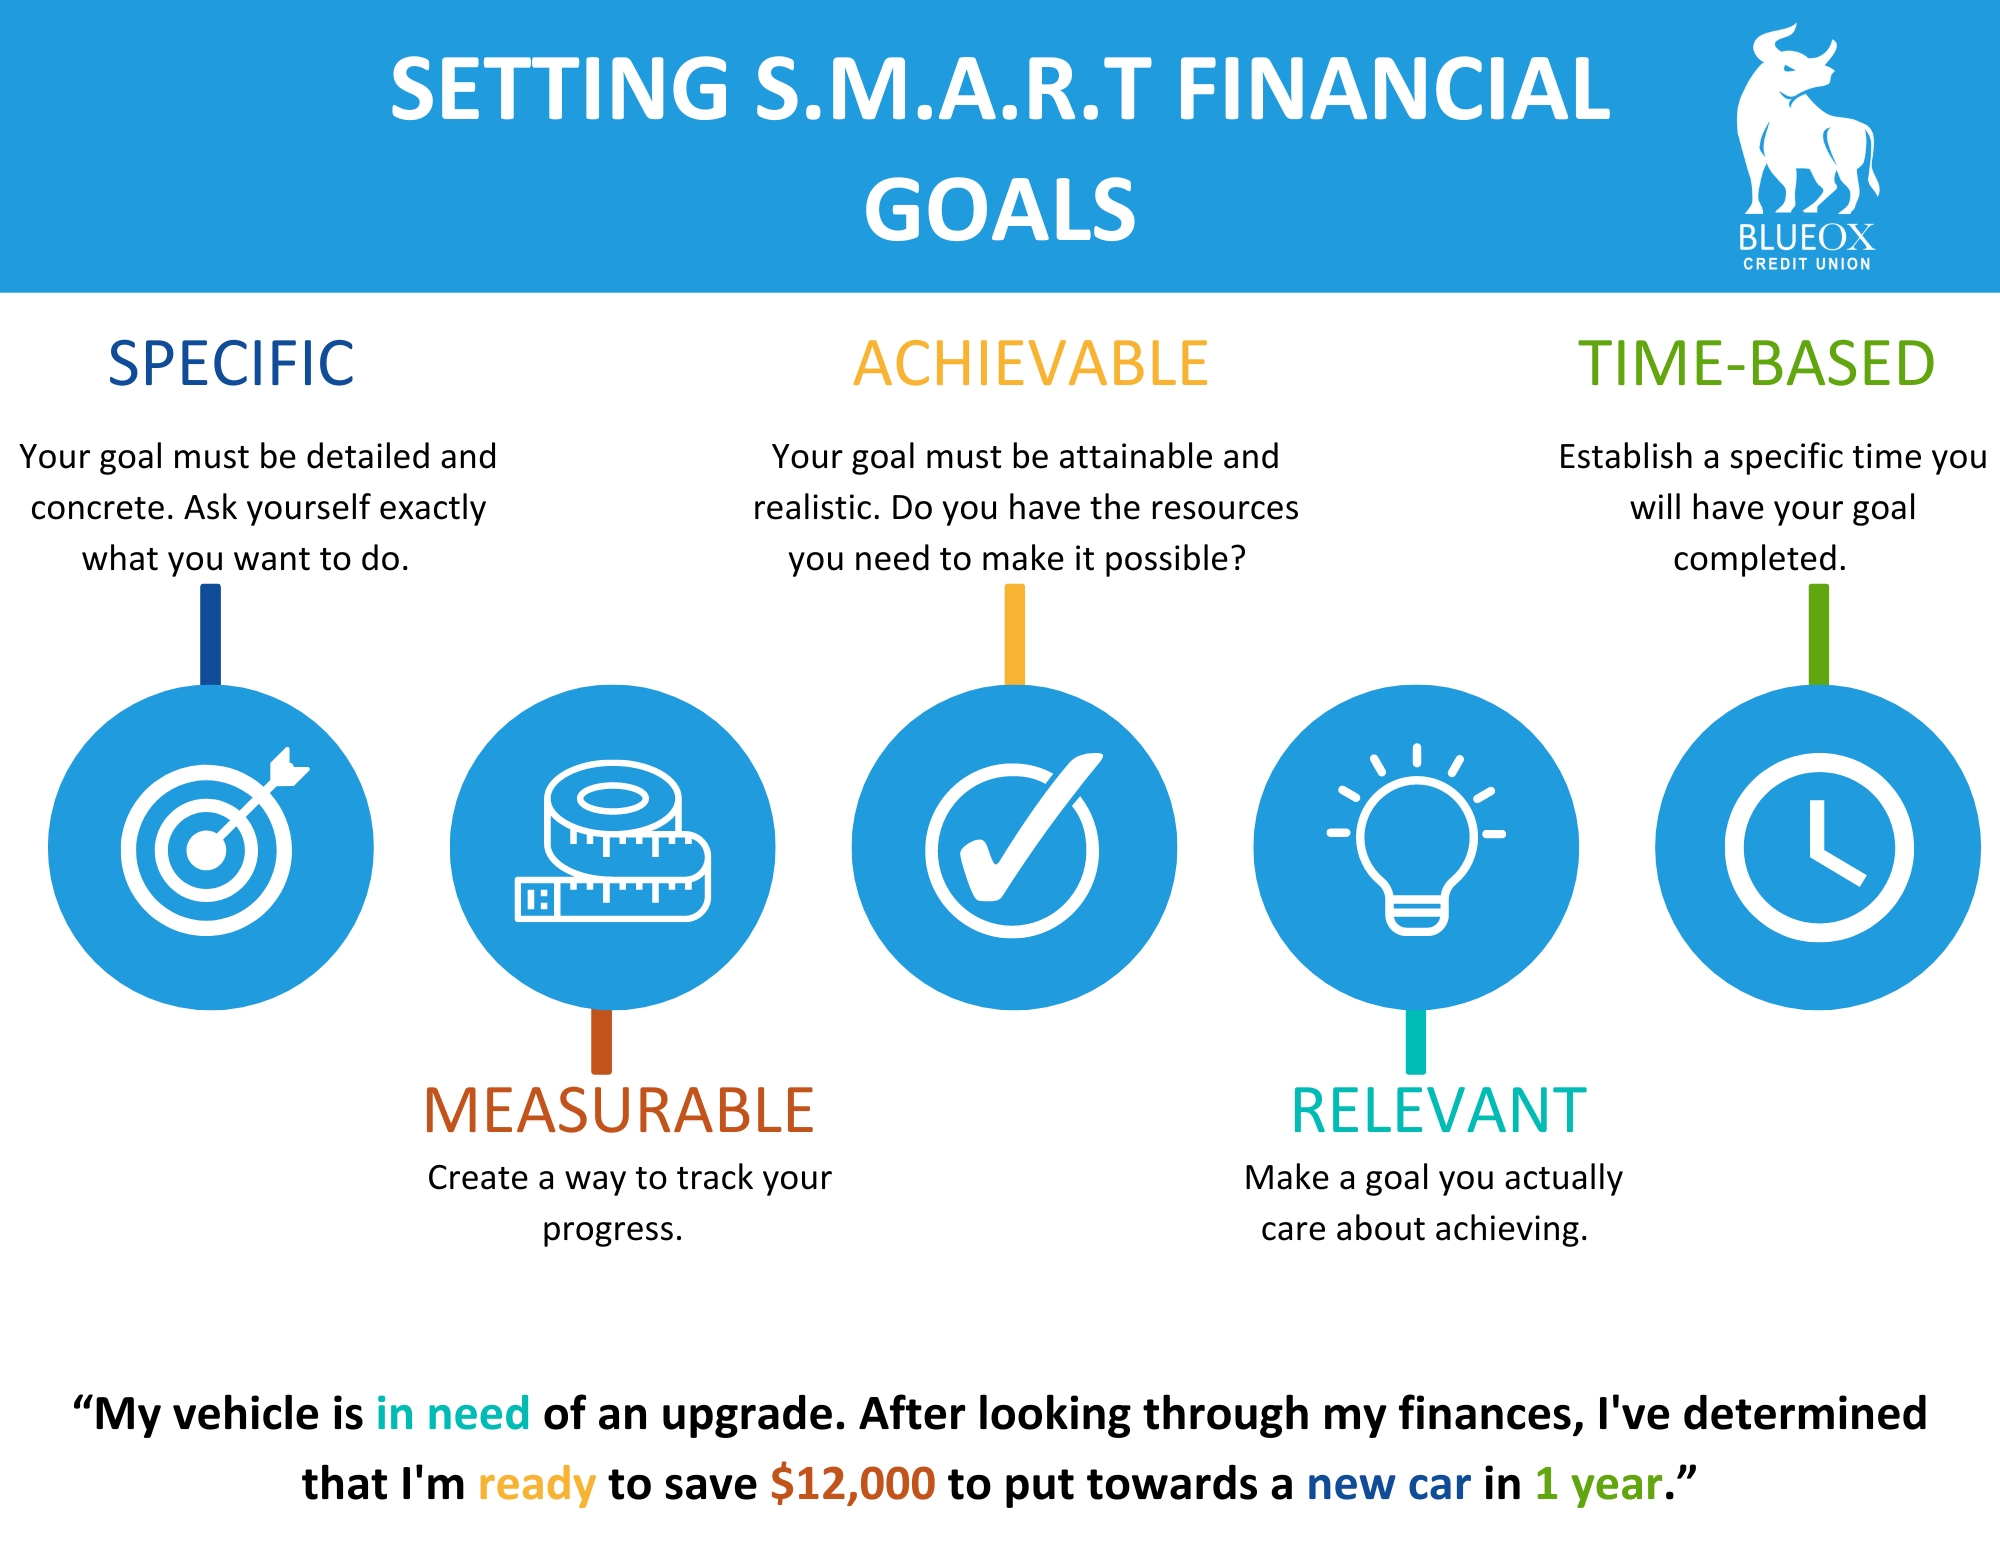 S.M.A.R.T Financial Goals Infographic - BlueOx Credit Union